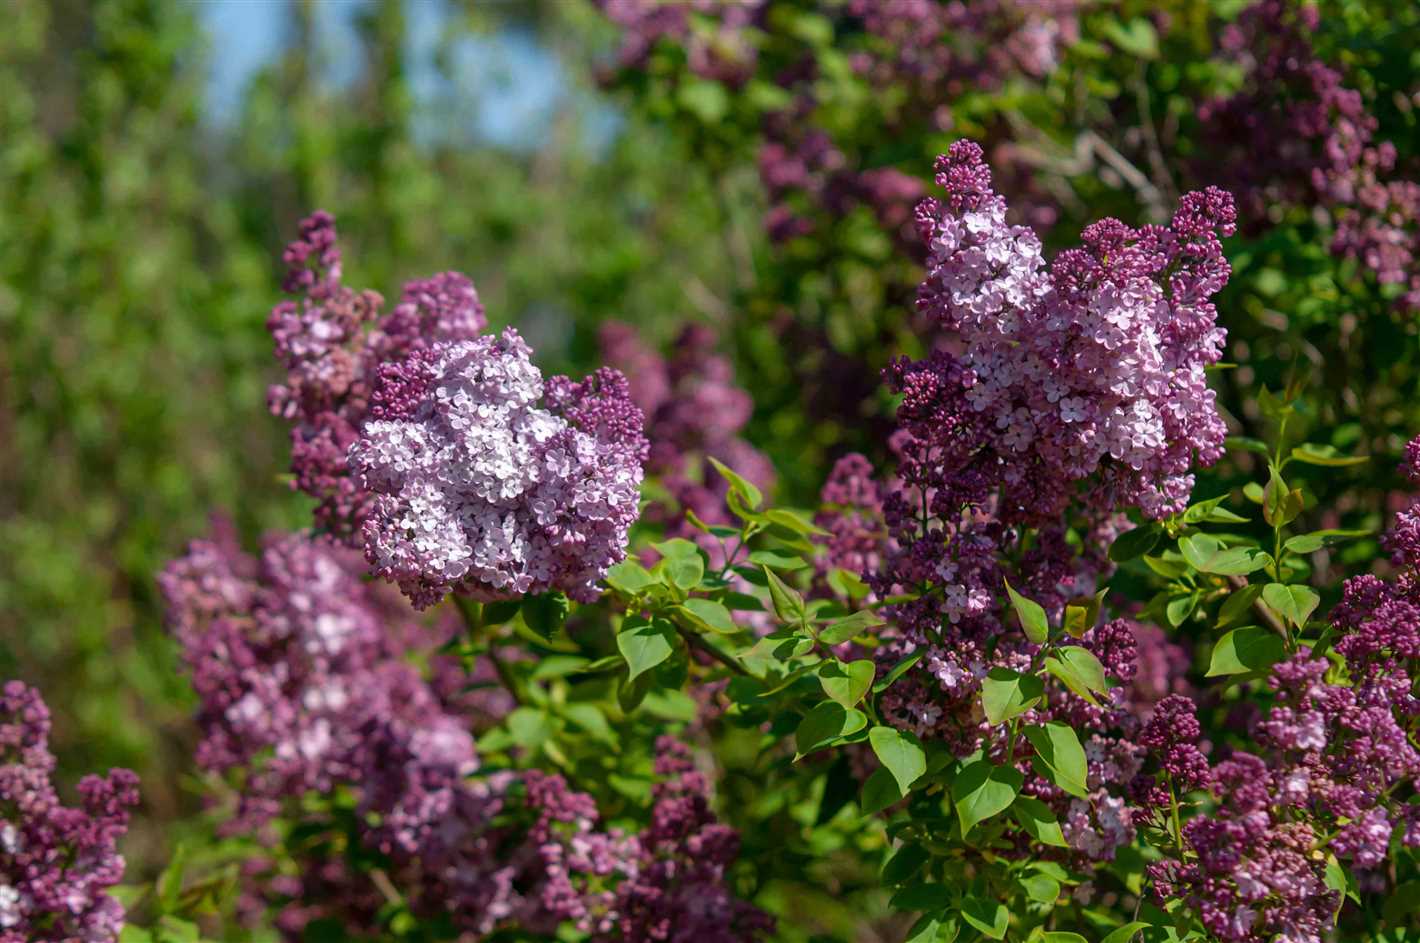 How to Prune Lilac?